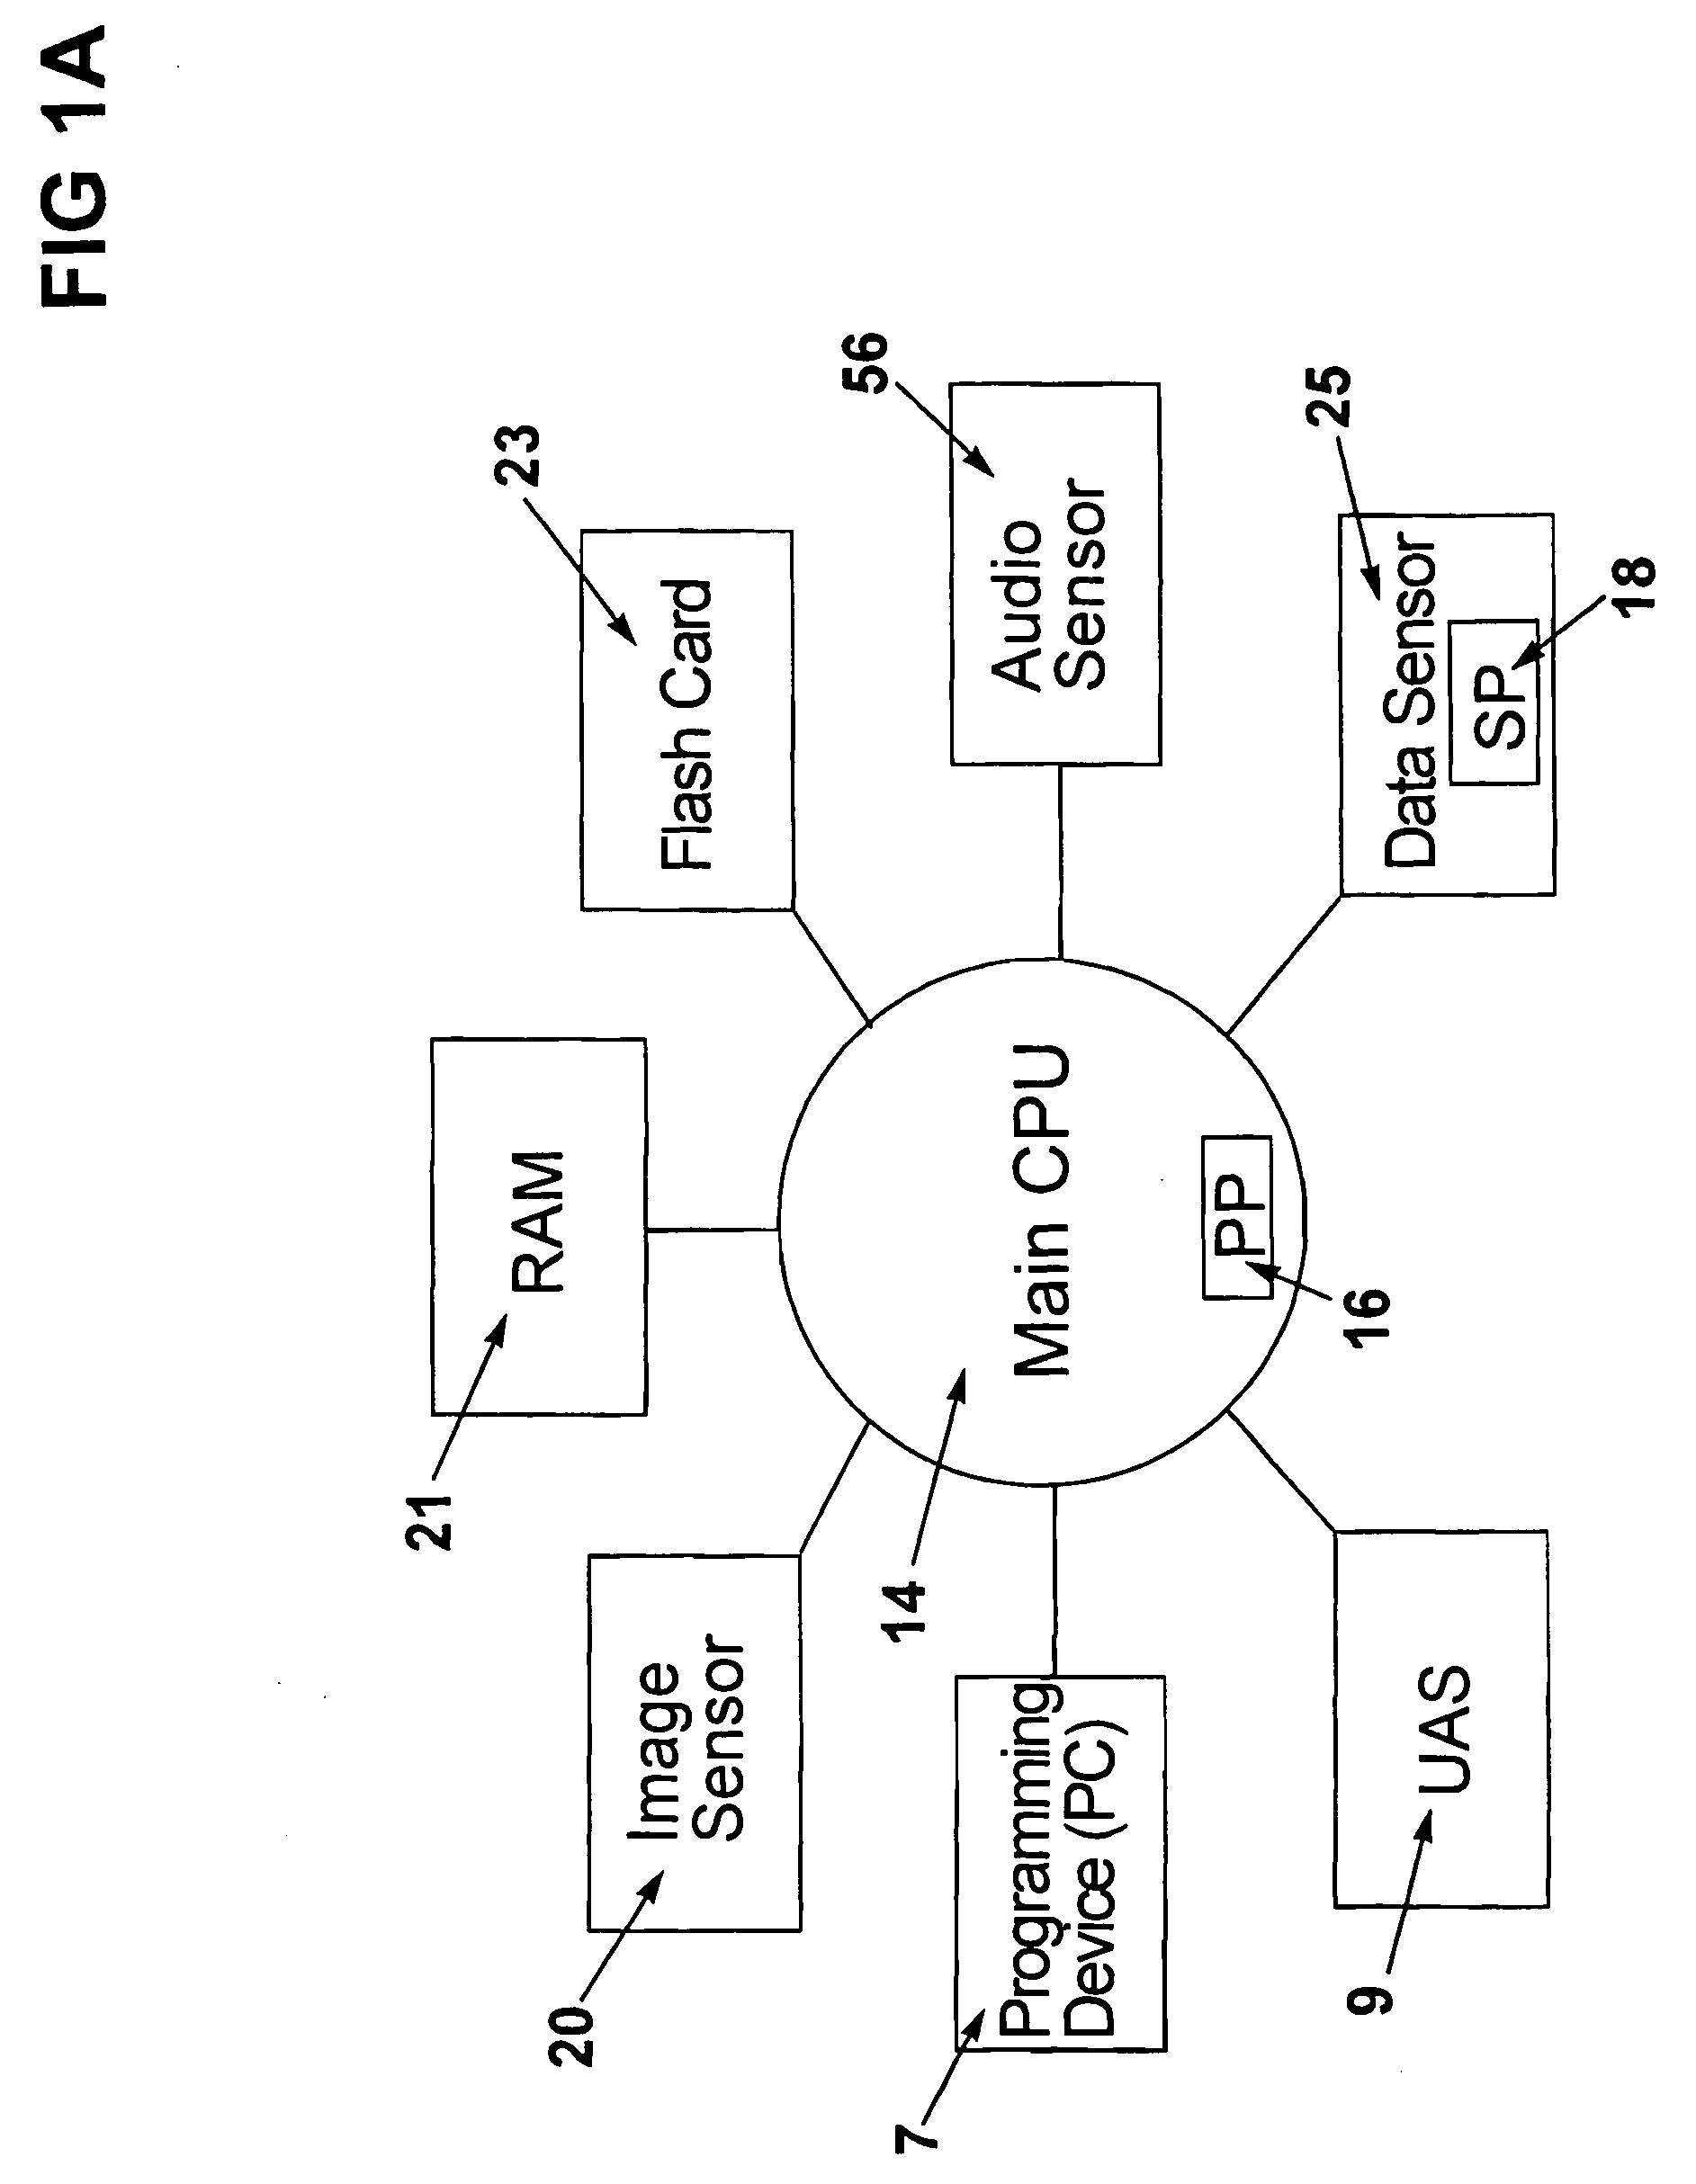 Video recording system for a vehicle